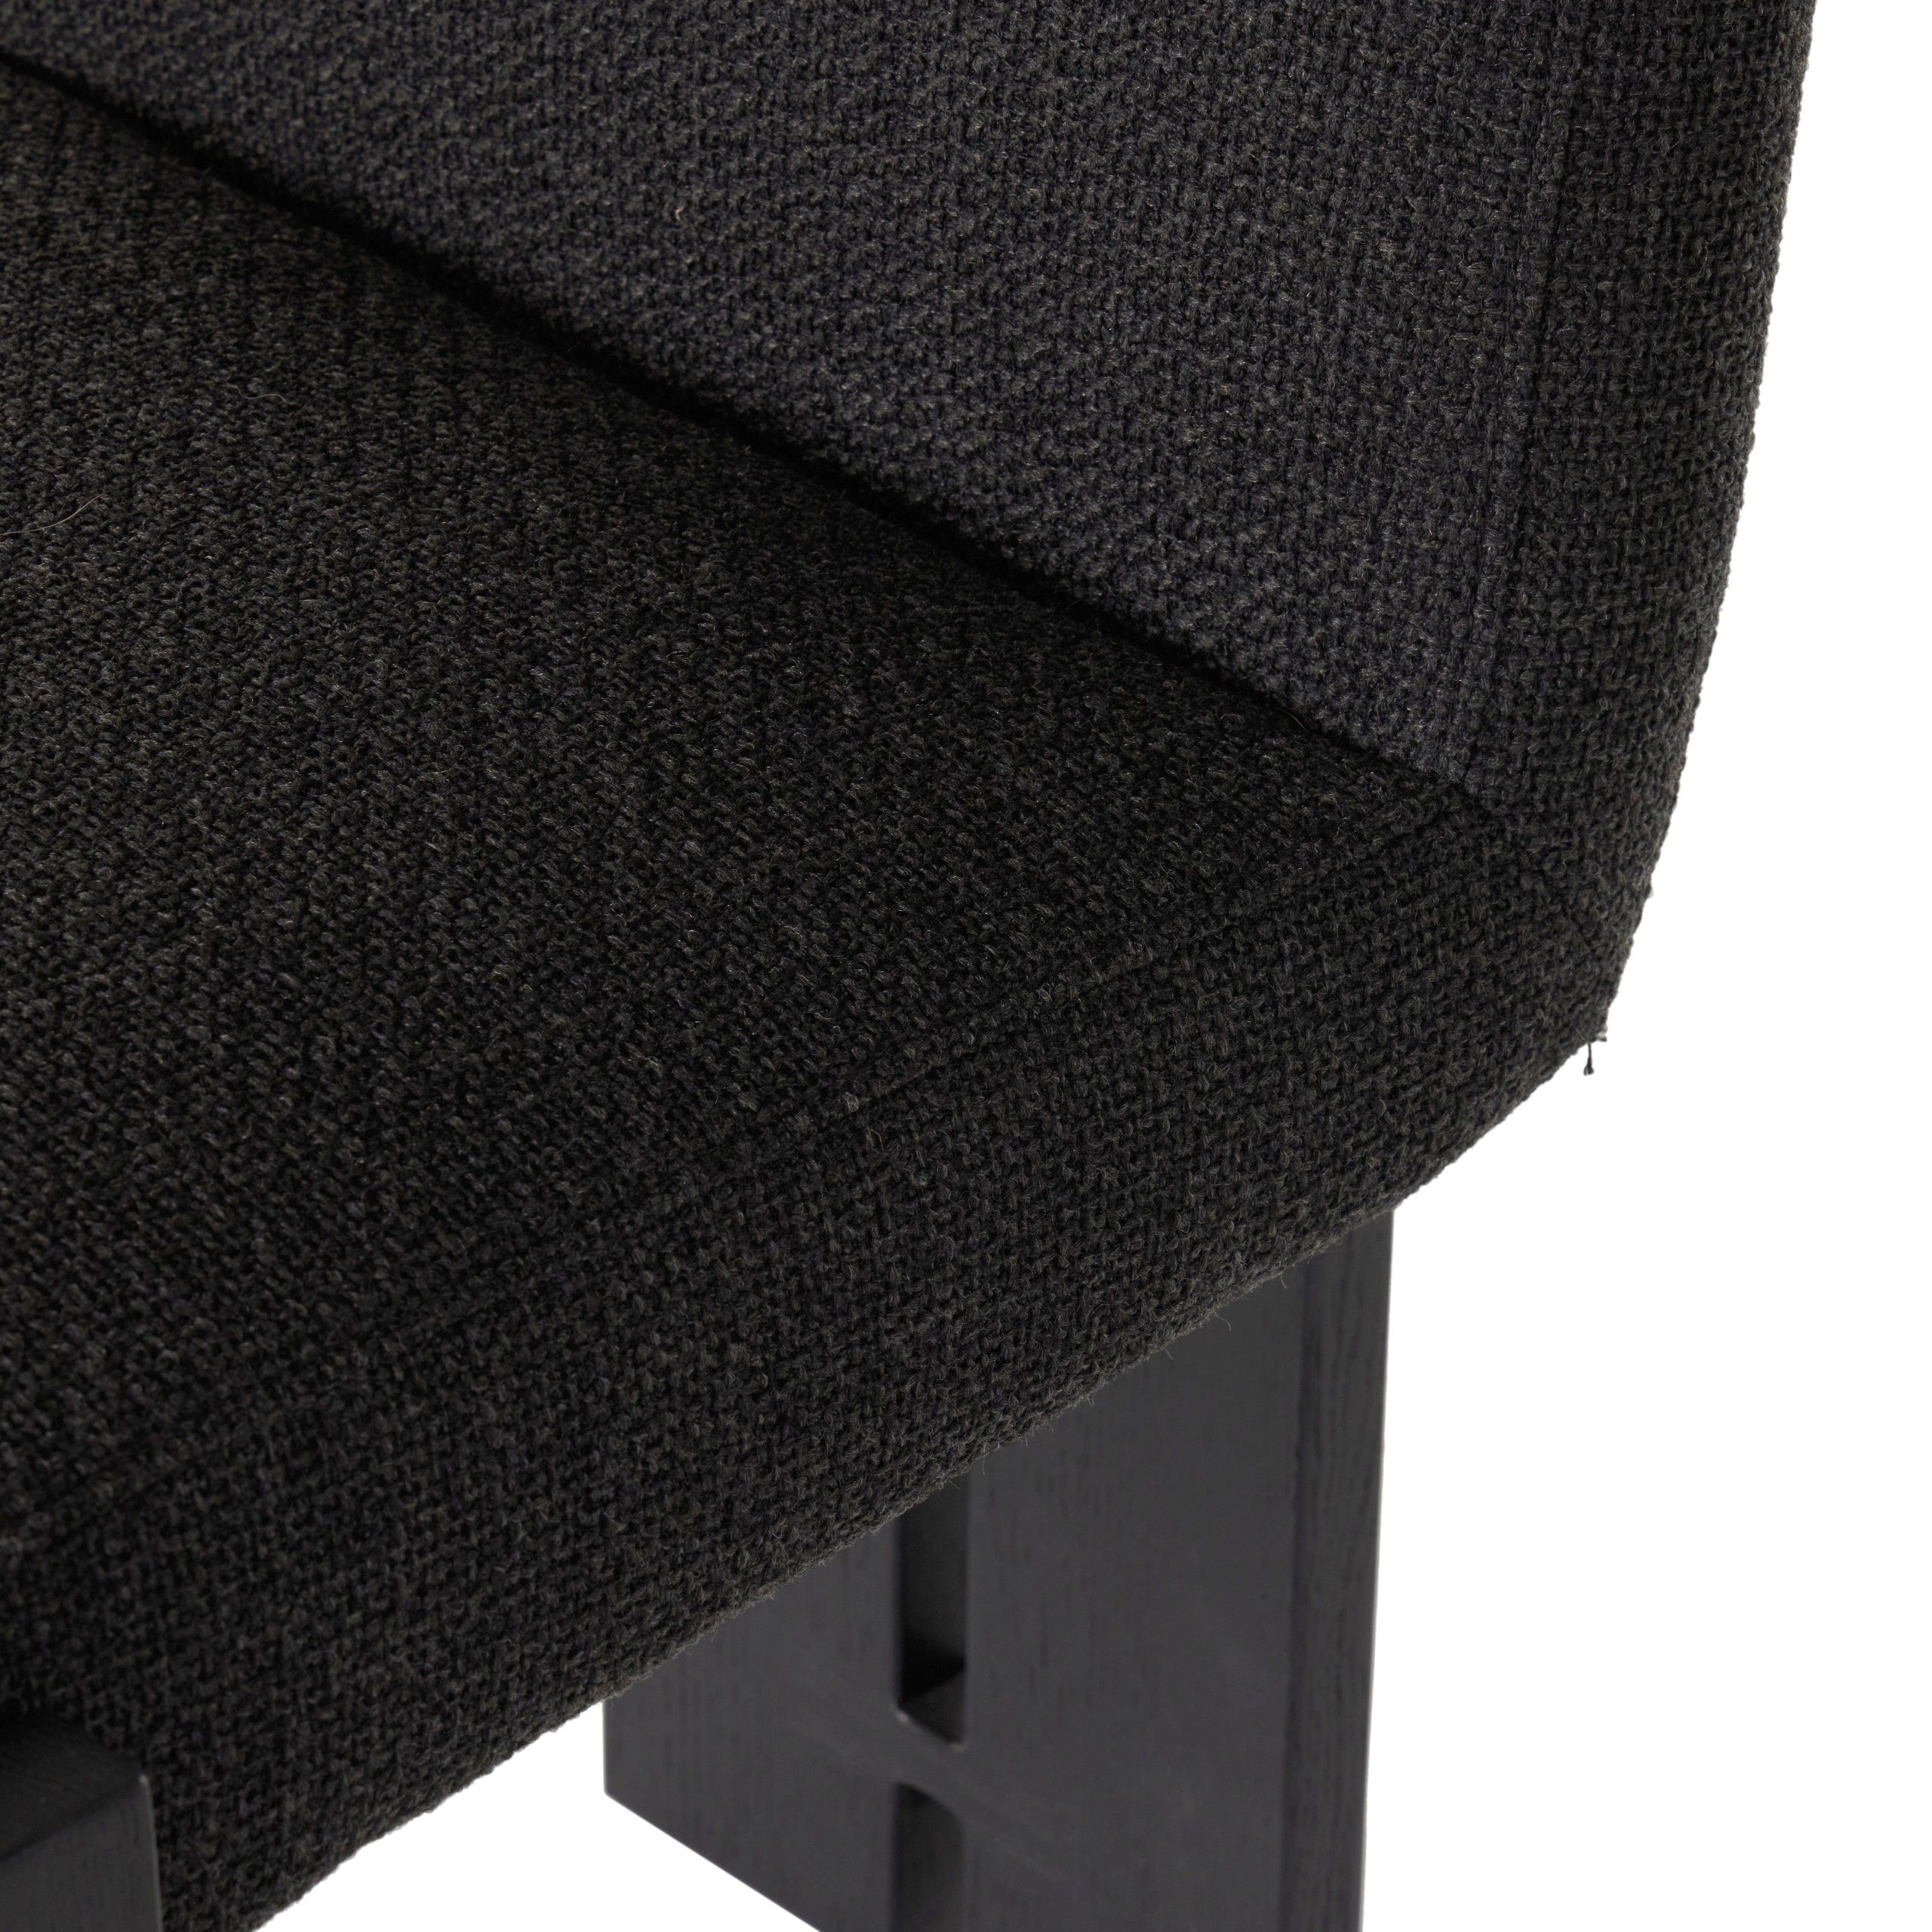 Black dining chair close up